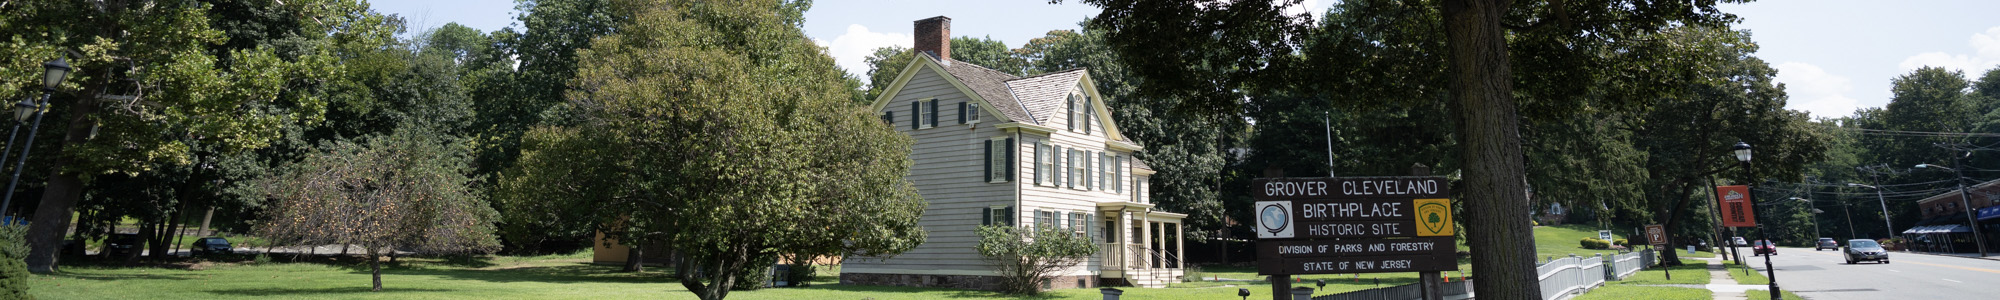 Grover Cleveland Birthplace Historic Site